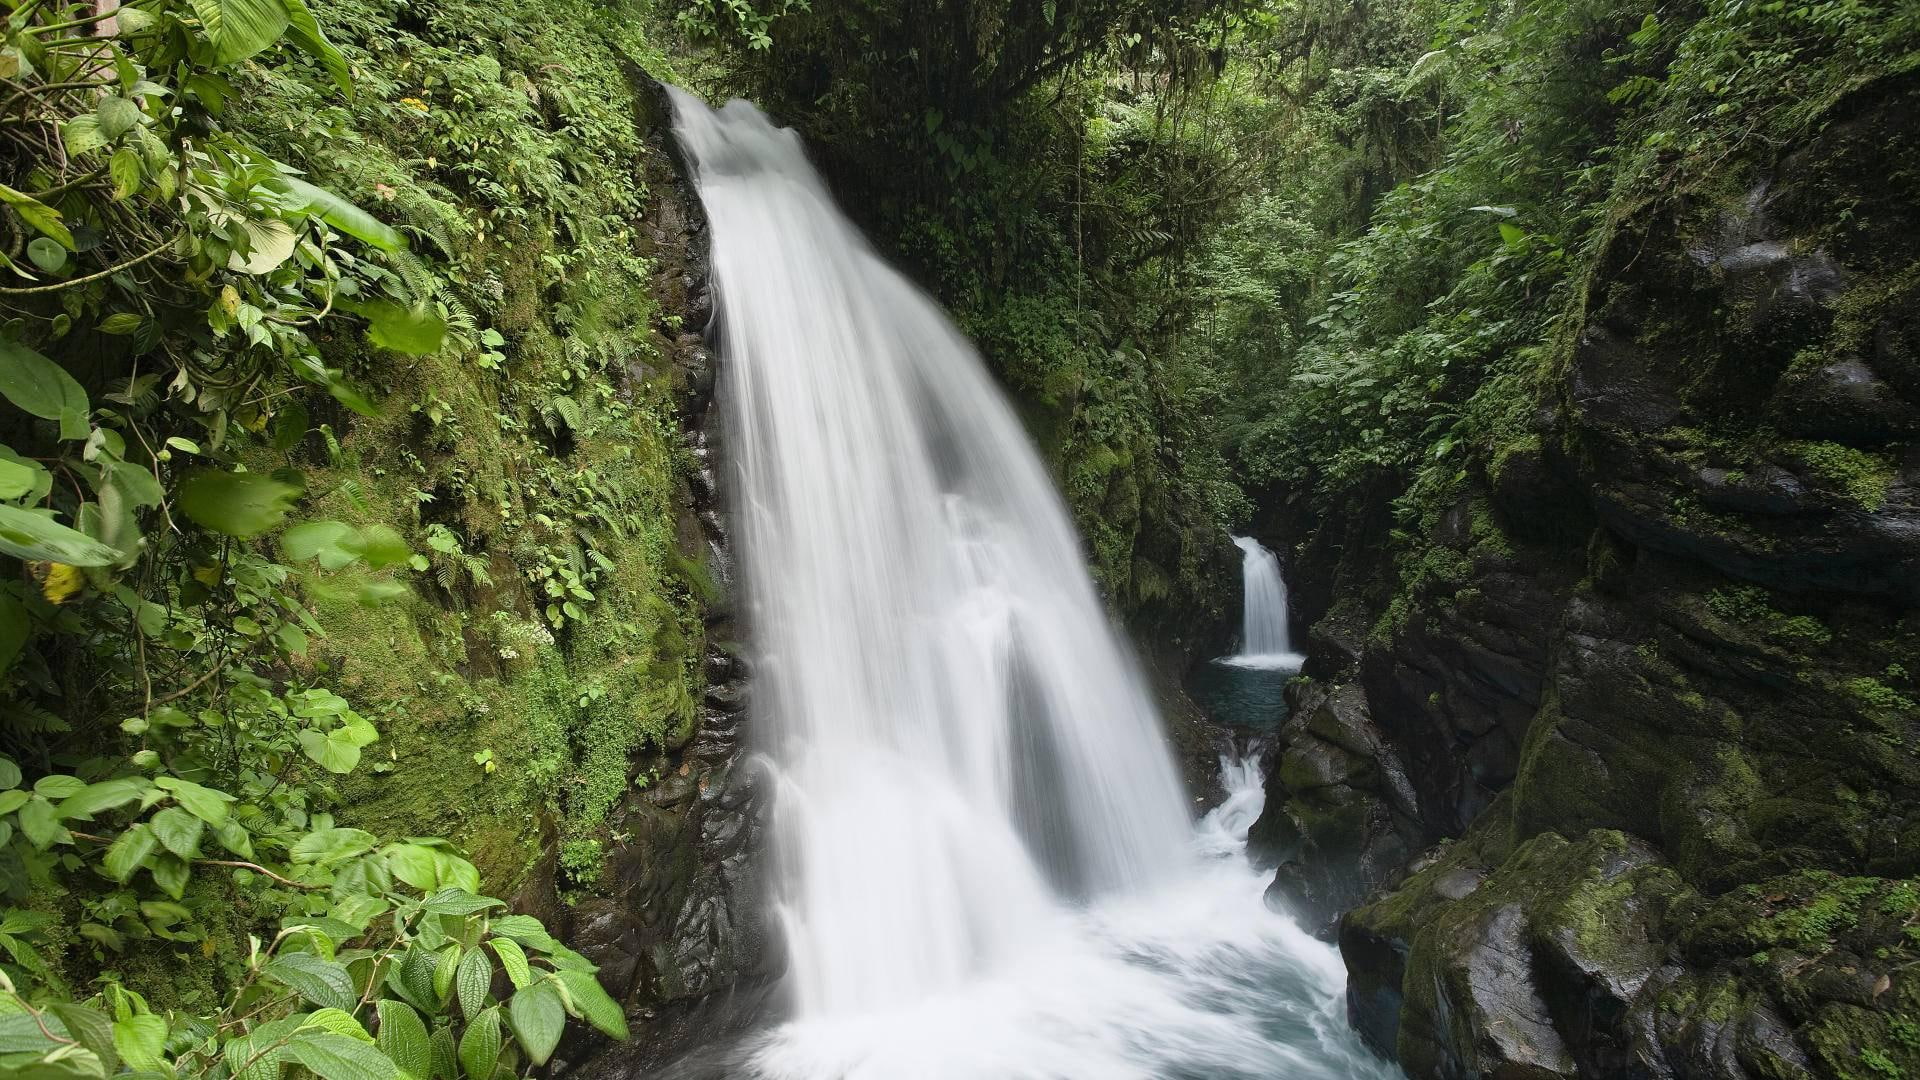 La Paz Waterfall In Costa Rica, trees, stream, gorge, duel, nature and landscapes